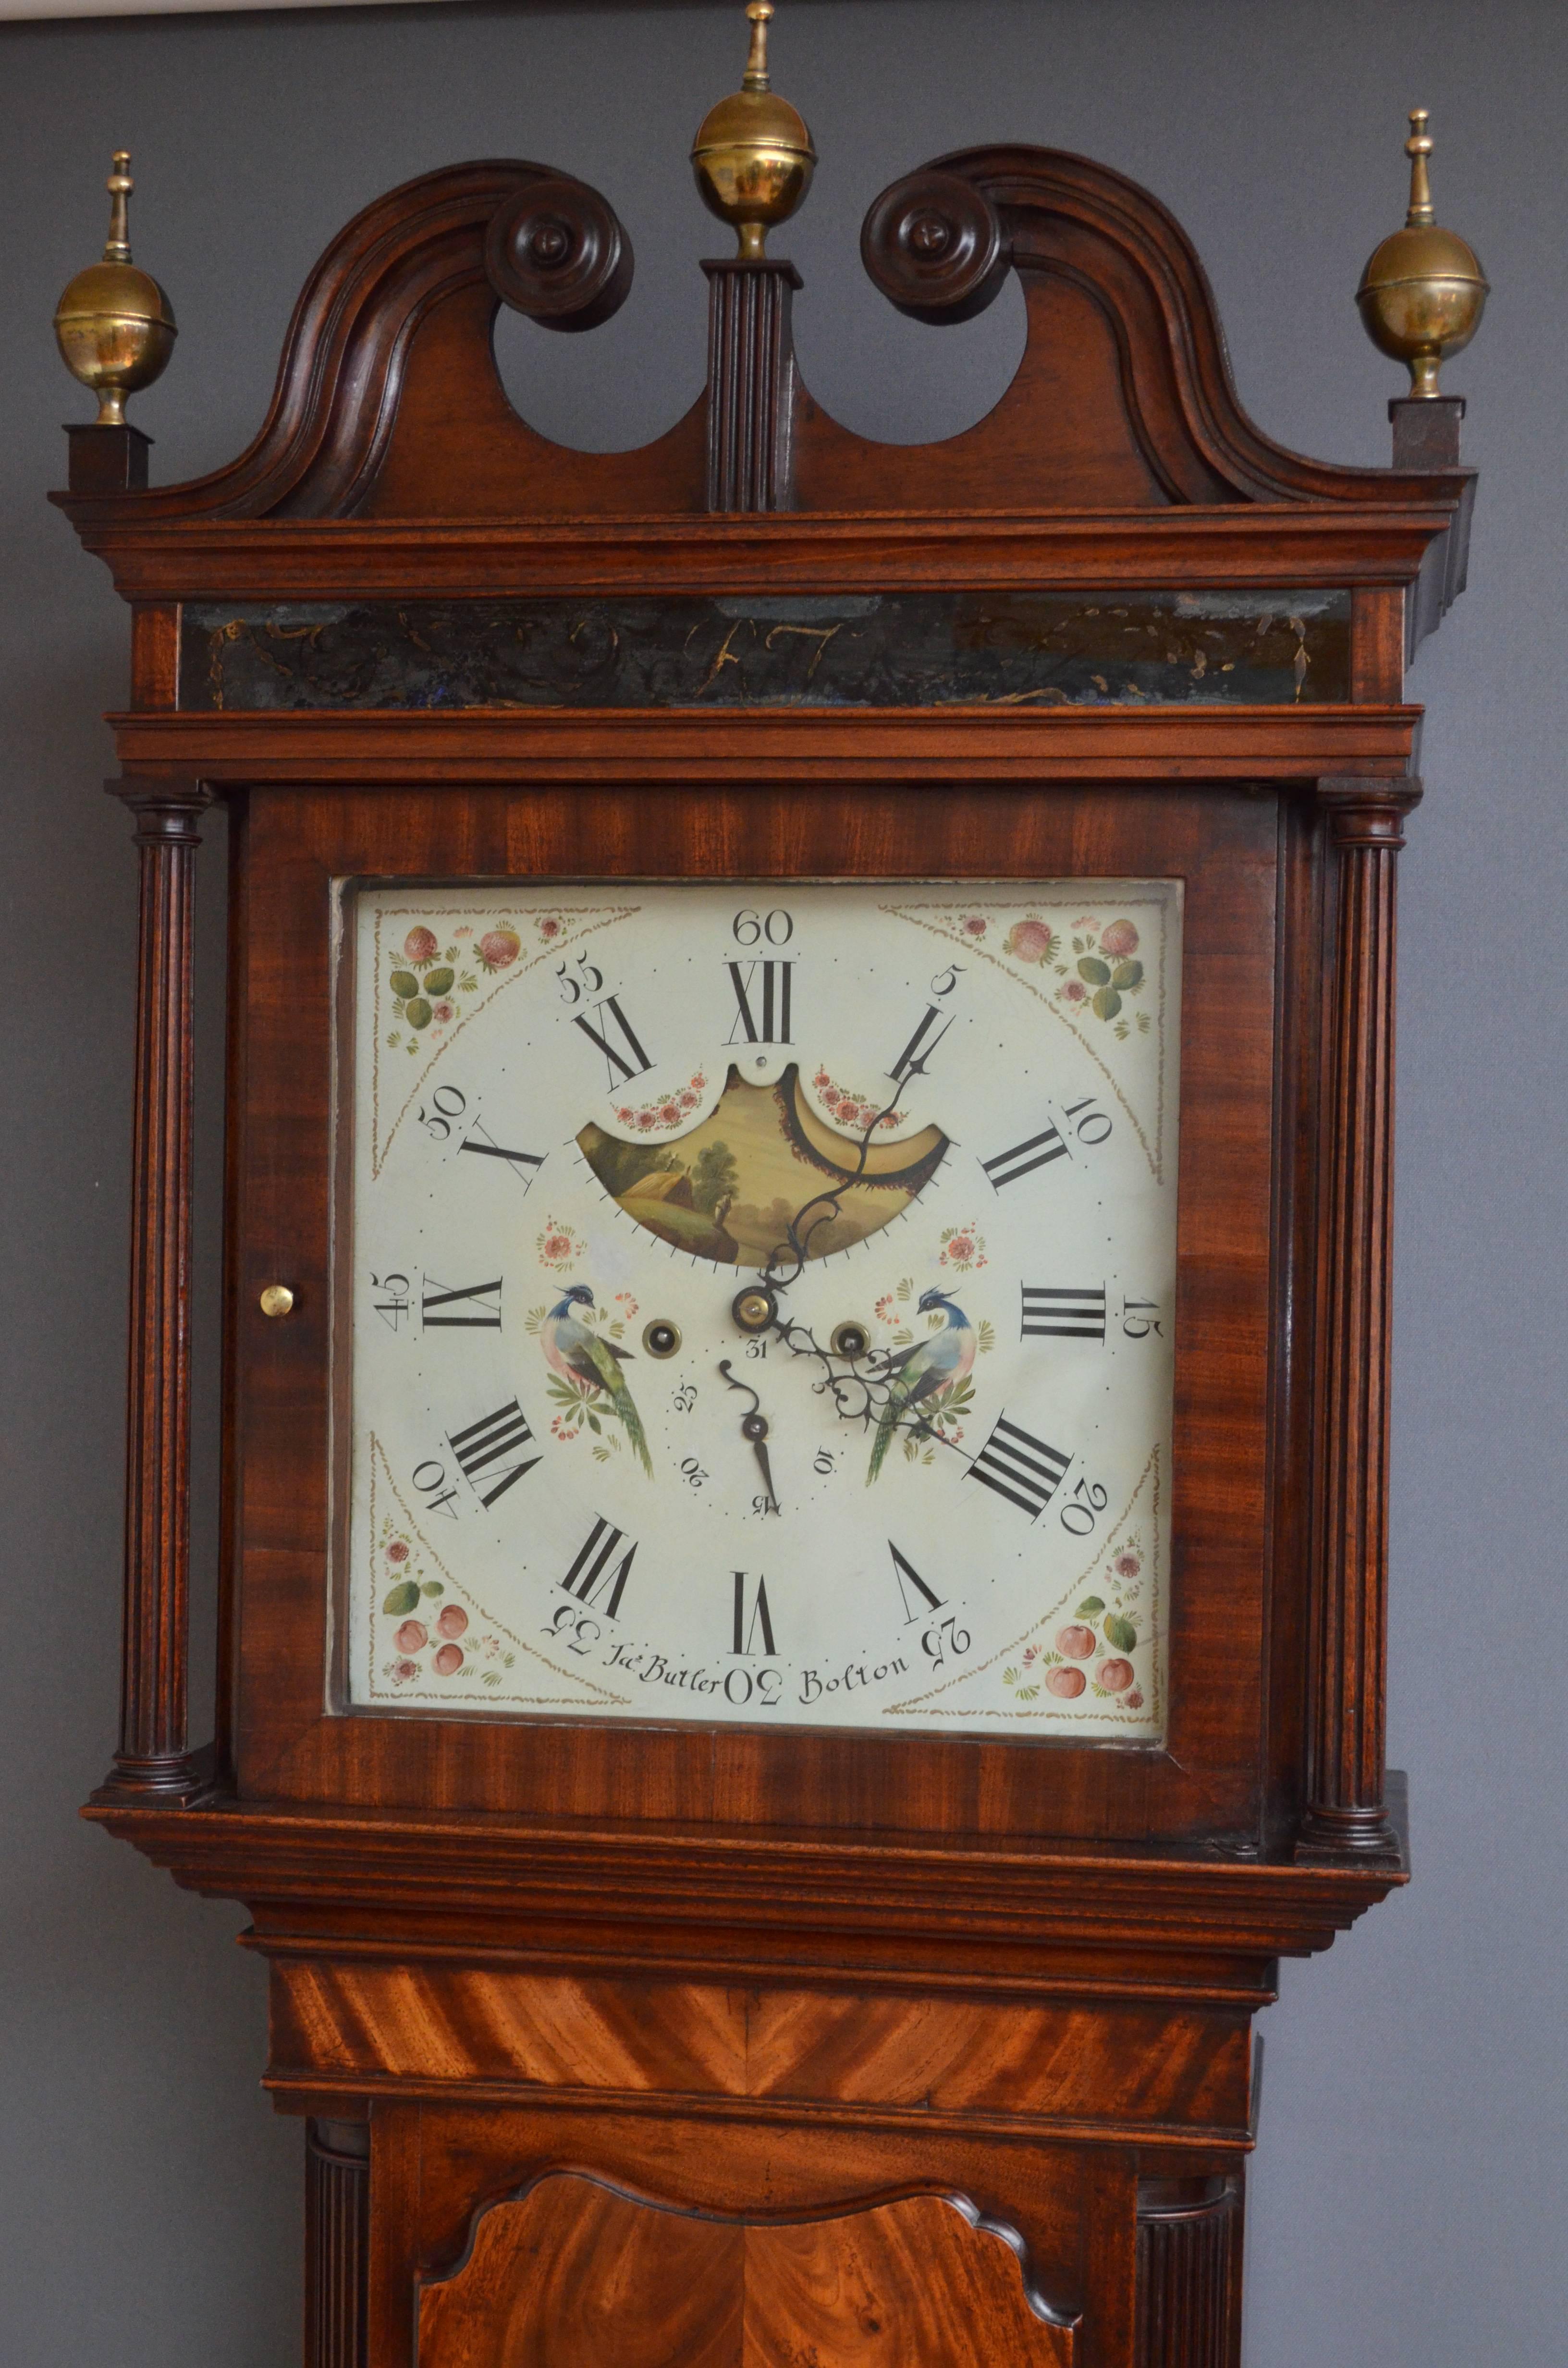 Sn3330 quality Georgian longcase clock, having enamel dial signed J.A.S Butler, Bolton with subsidiary seconds dial, lunar calendar, painted with pastoral landscape with figure, fruit and spandrels, and moon phase, 8-day movement with anchor